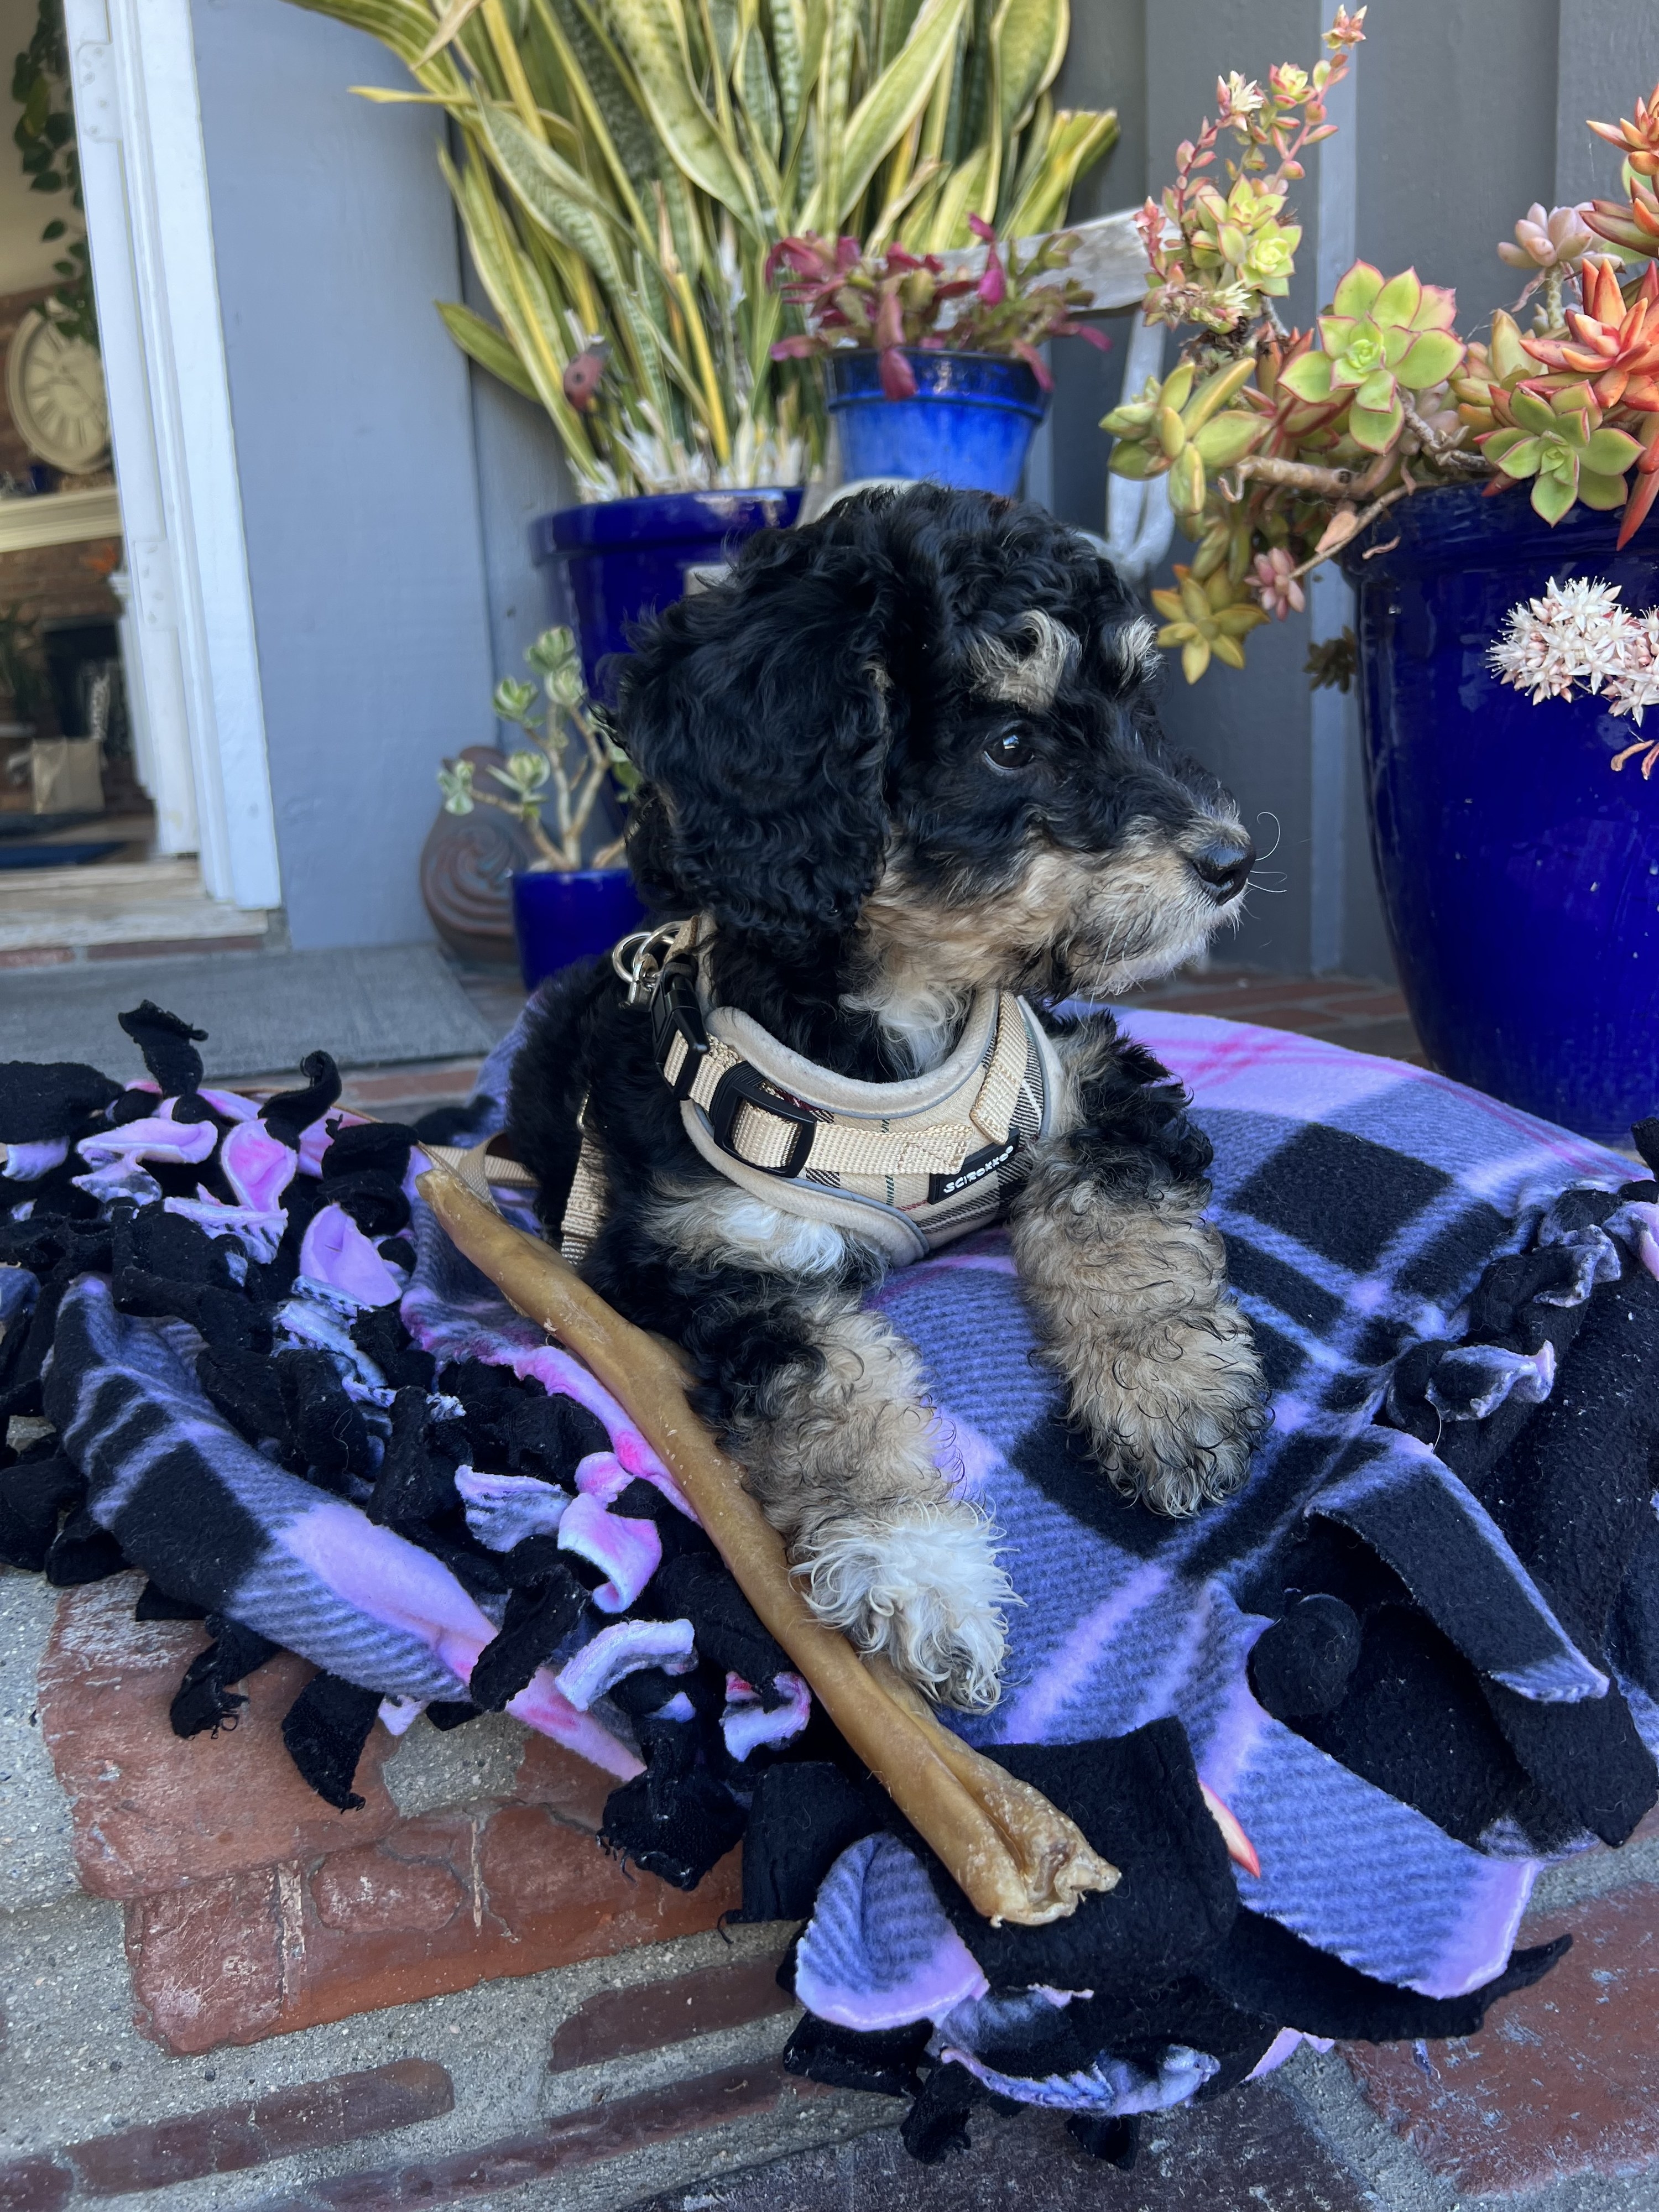 small, curly-haired puppy wears a harness and lays on a blanket outside on a porch